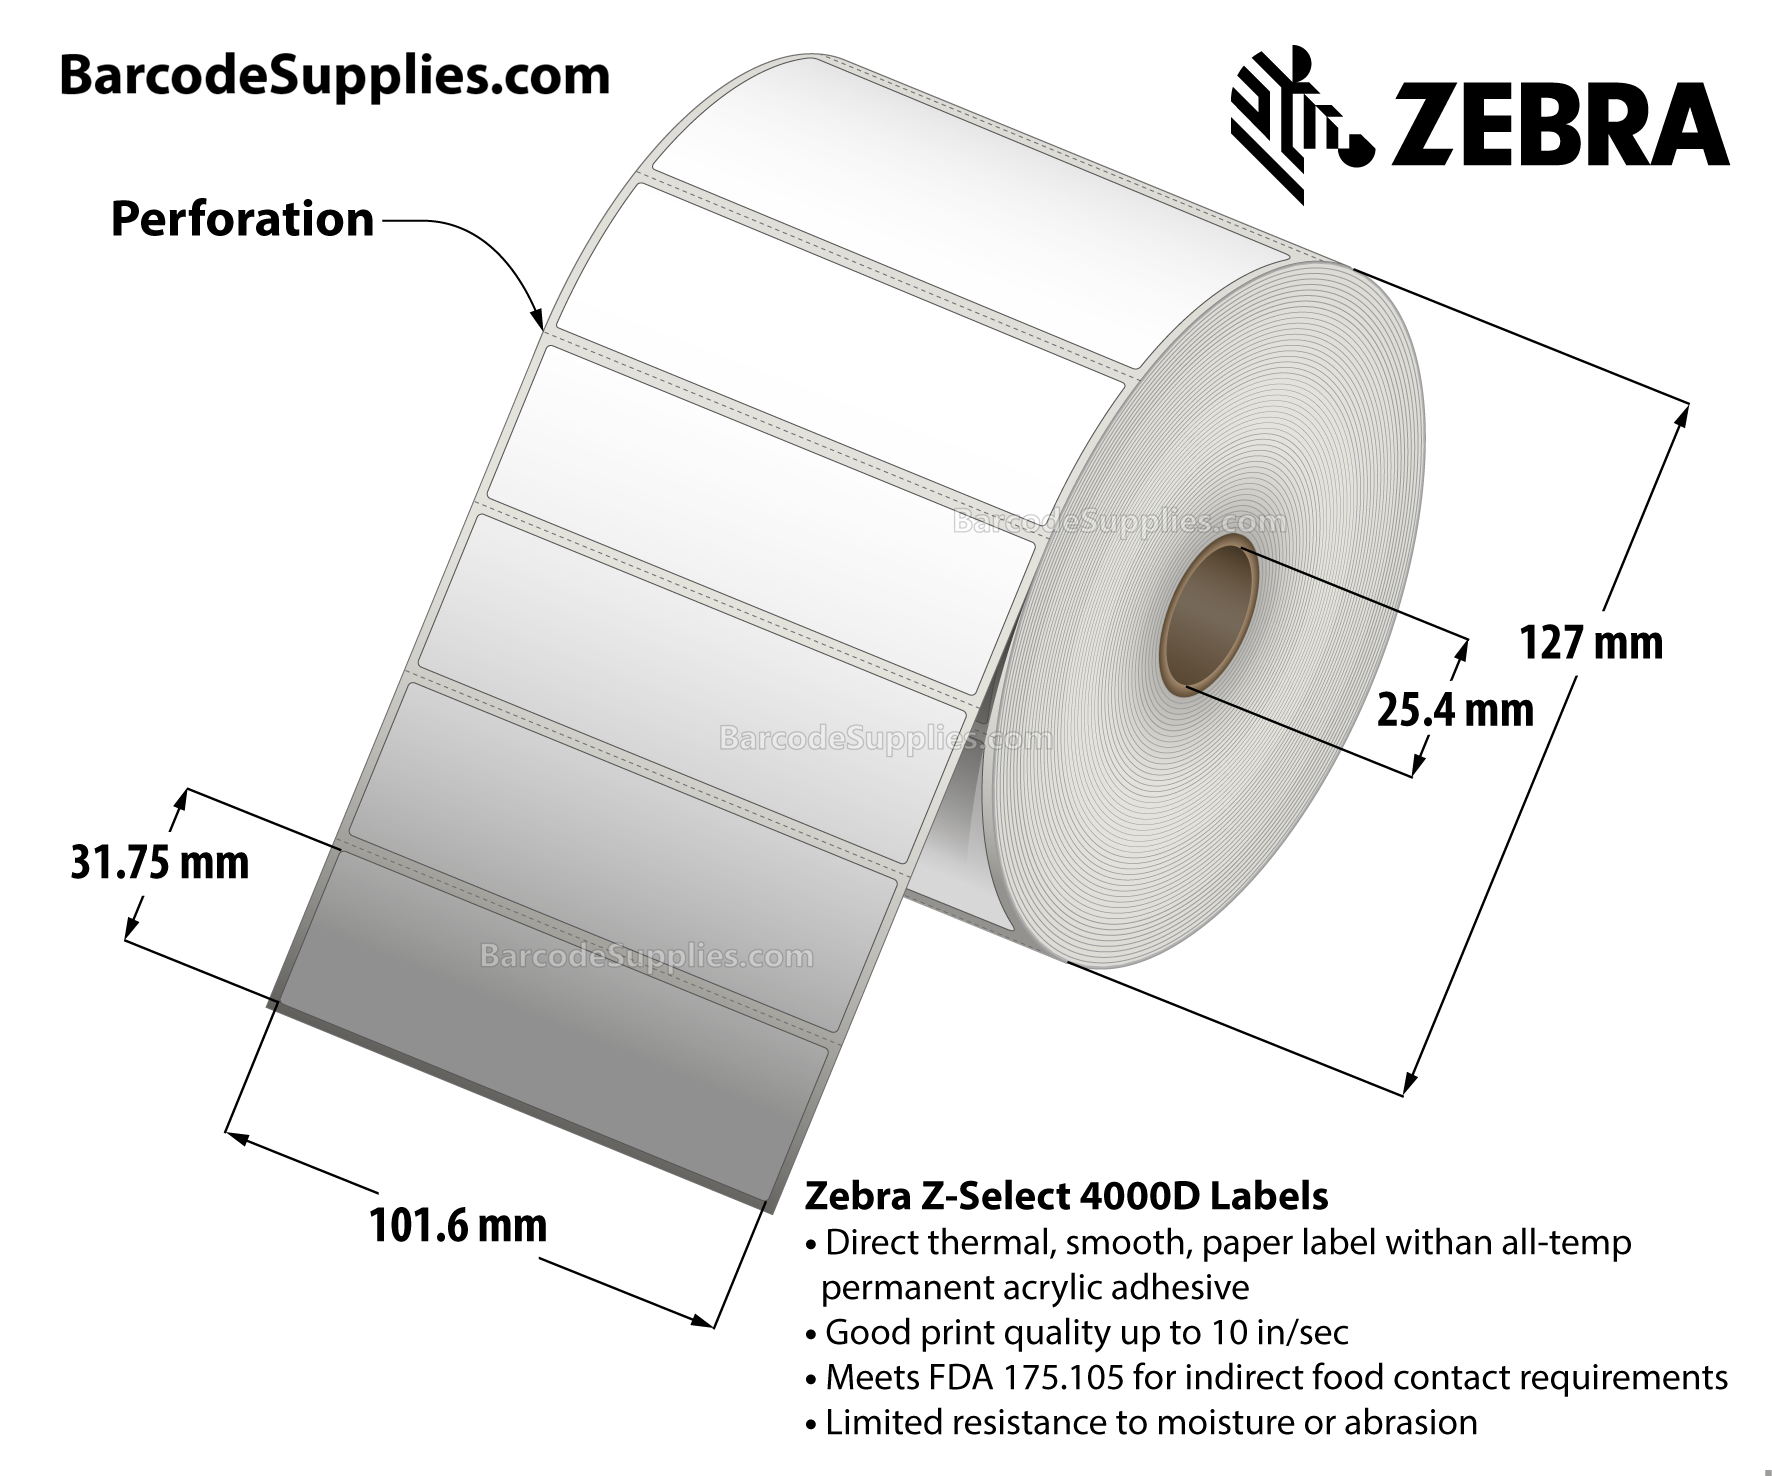 4 x 1.25 Direct Thermal White Z-Select 4000D Labels With All-Temp Adhesive - Perforated - 2100 Labels Per Roll - Carton Of 12 Rolls - 25200 Labels Total - MPN: 10015349